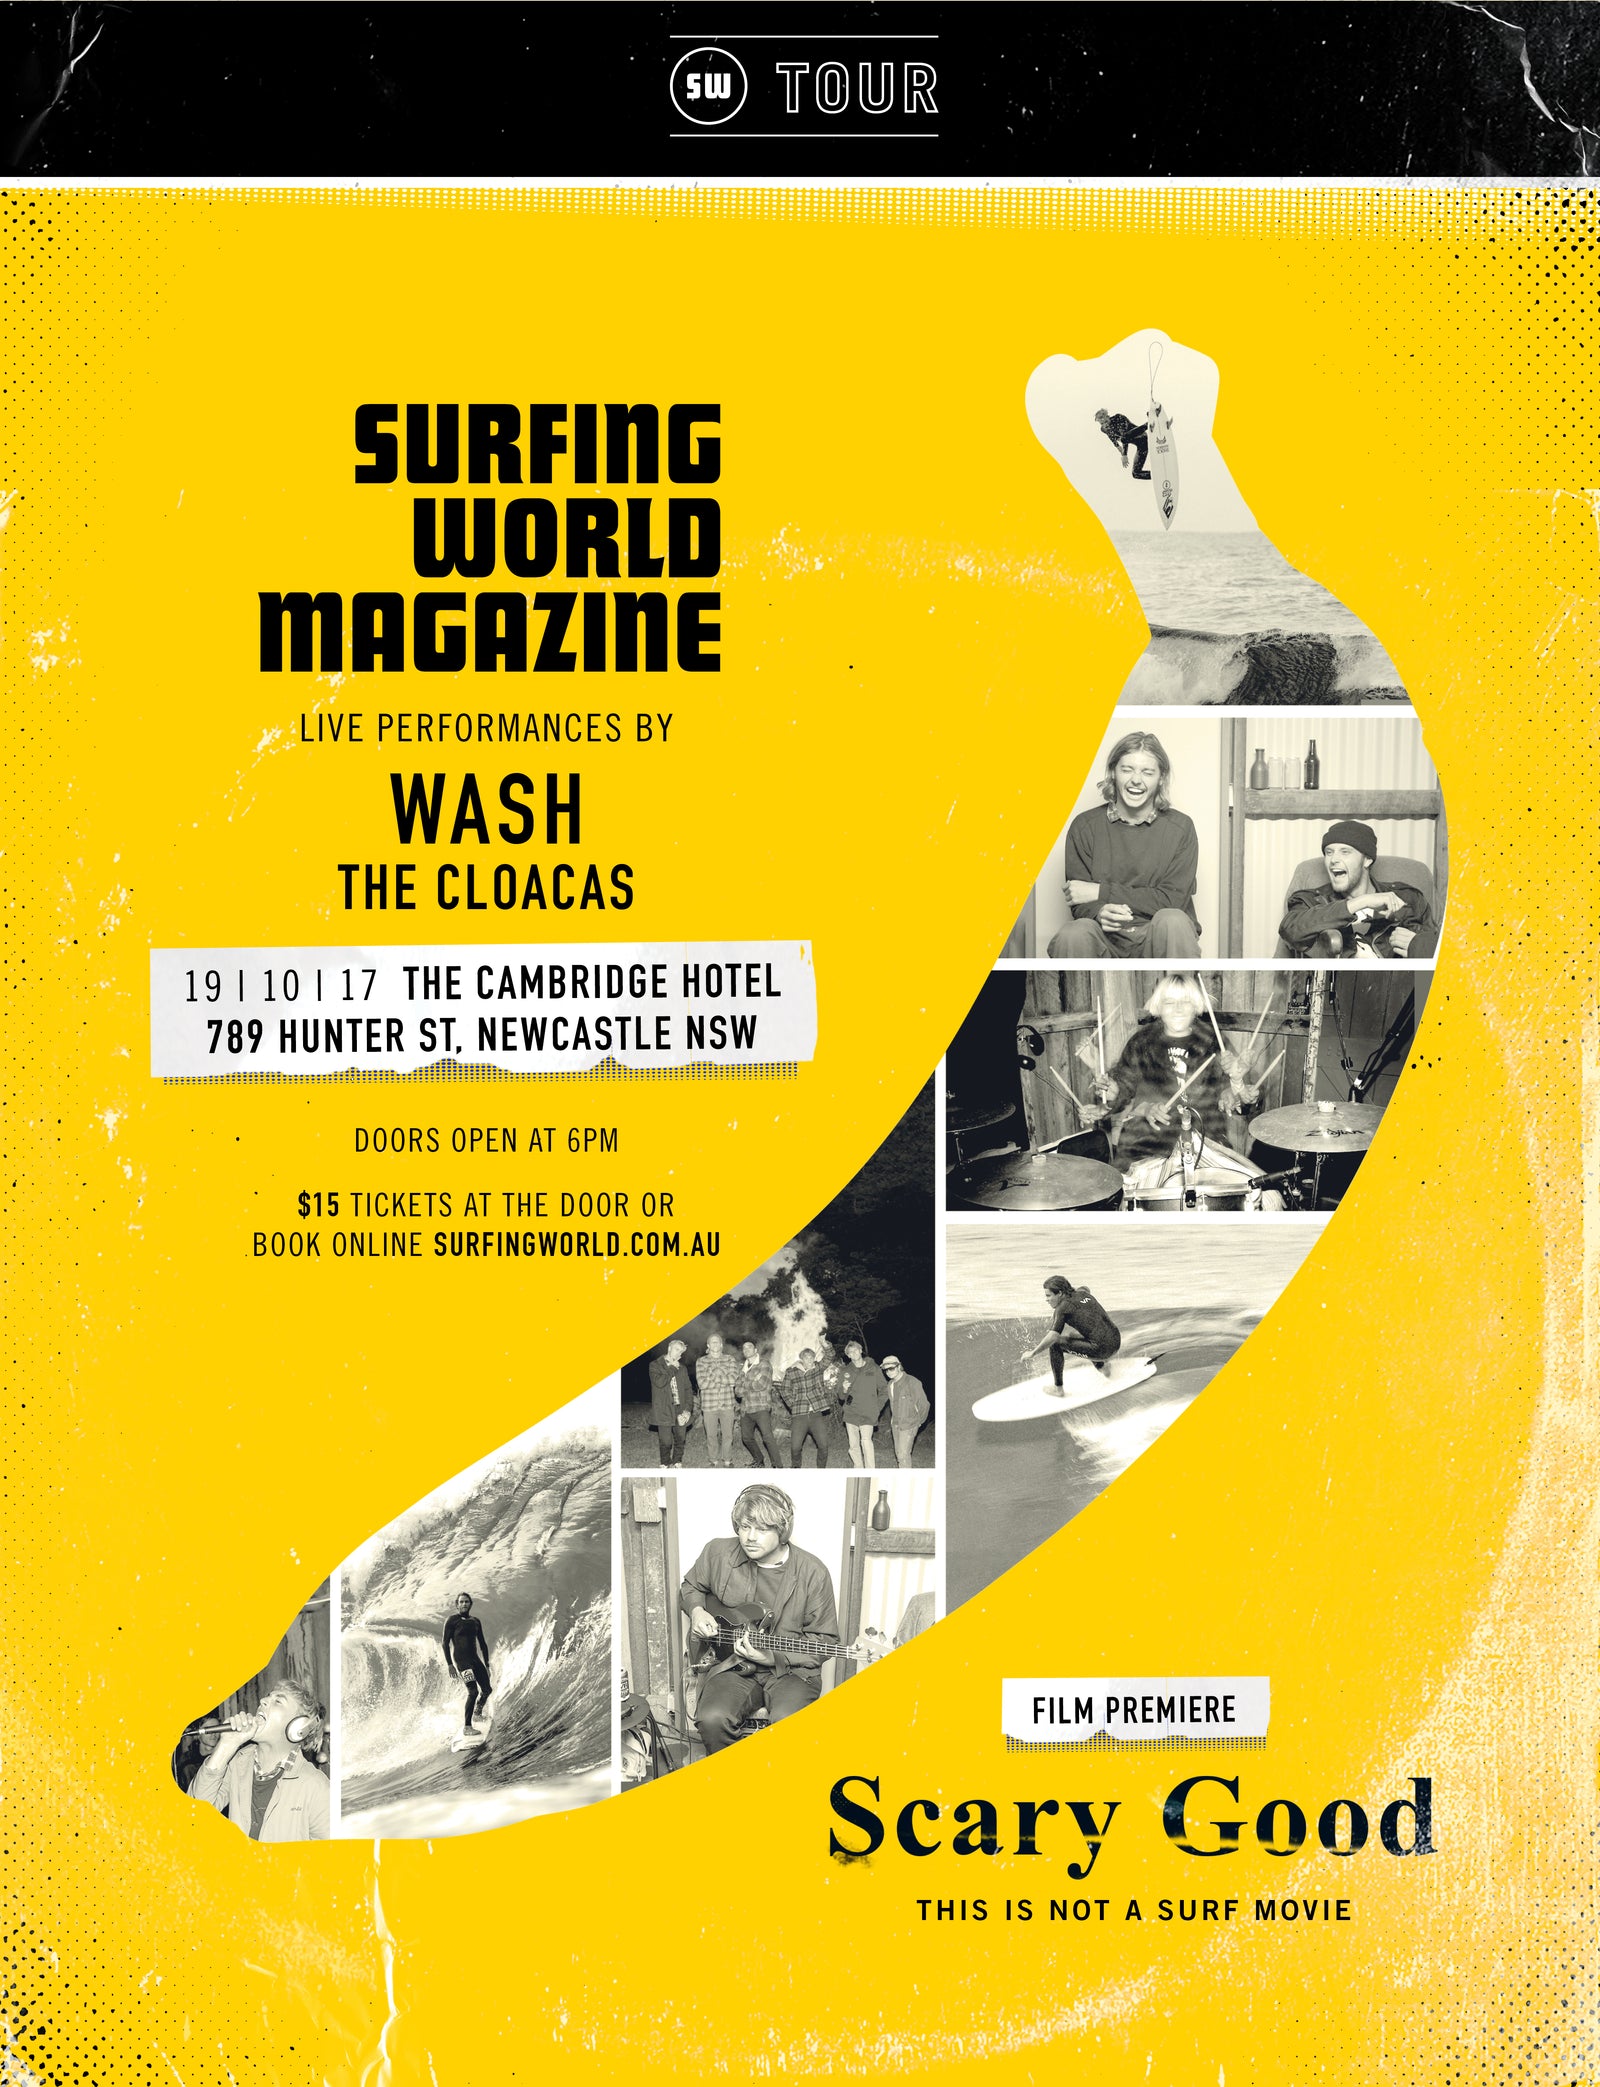 Surfing World Mag ‘Scary Good' Film Premier - Newcastle